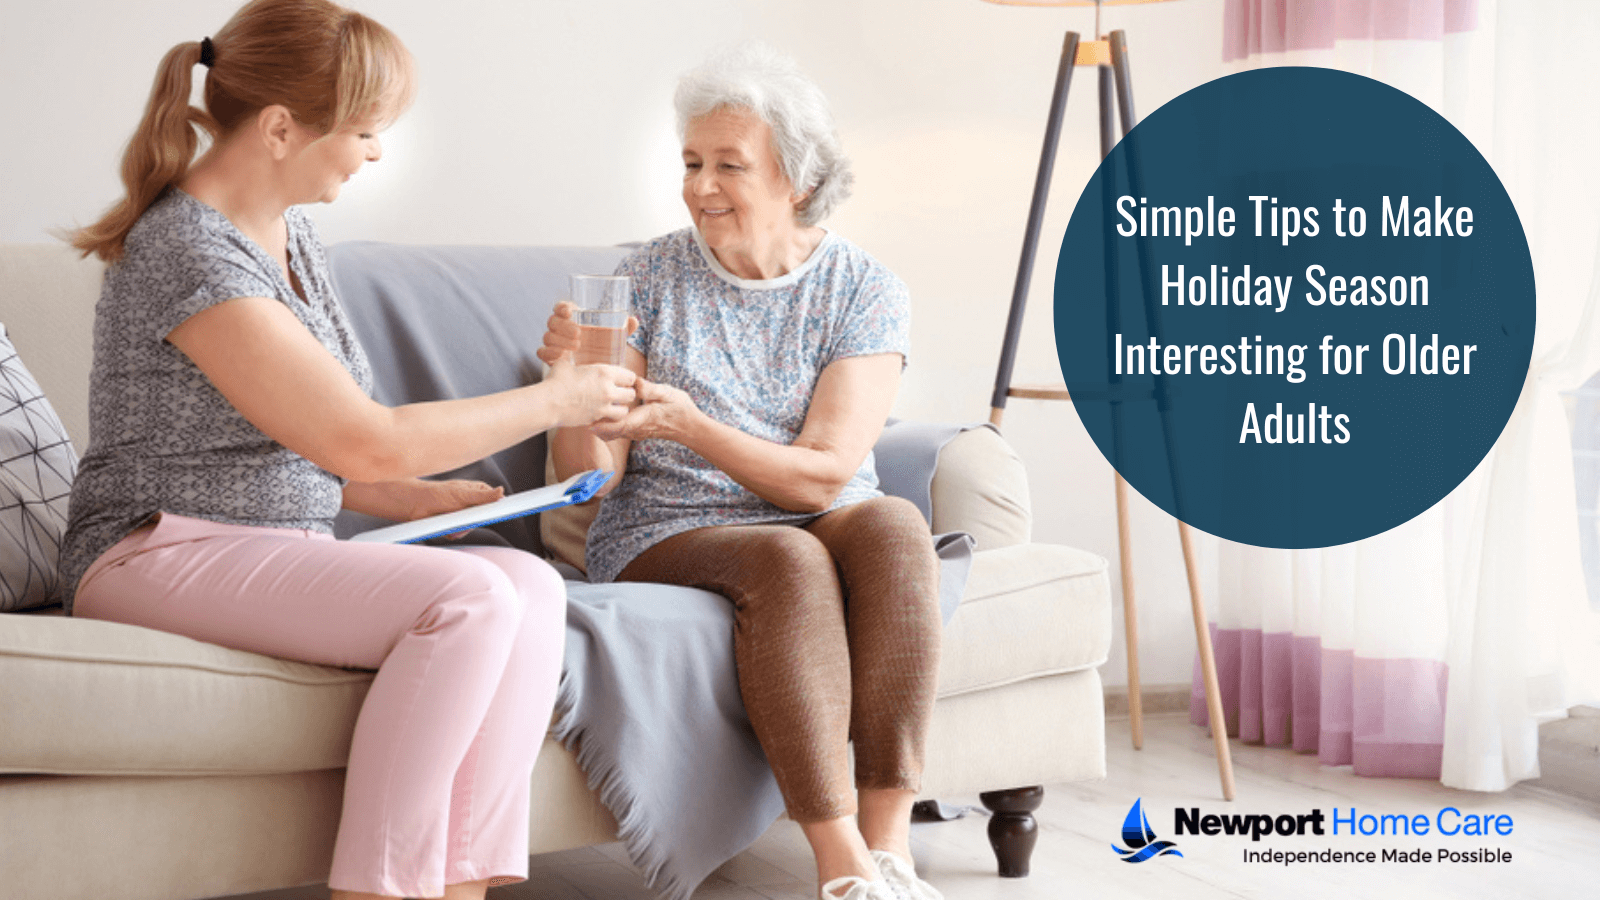 Simple Tips to Make Holiday Season Interesting for Older Adults